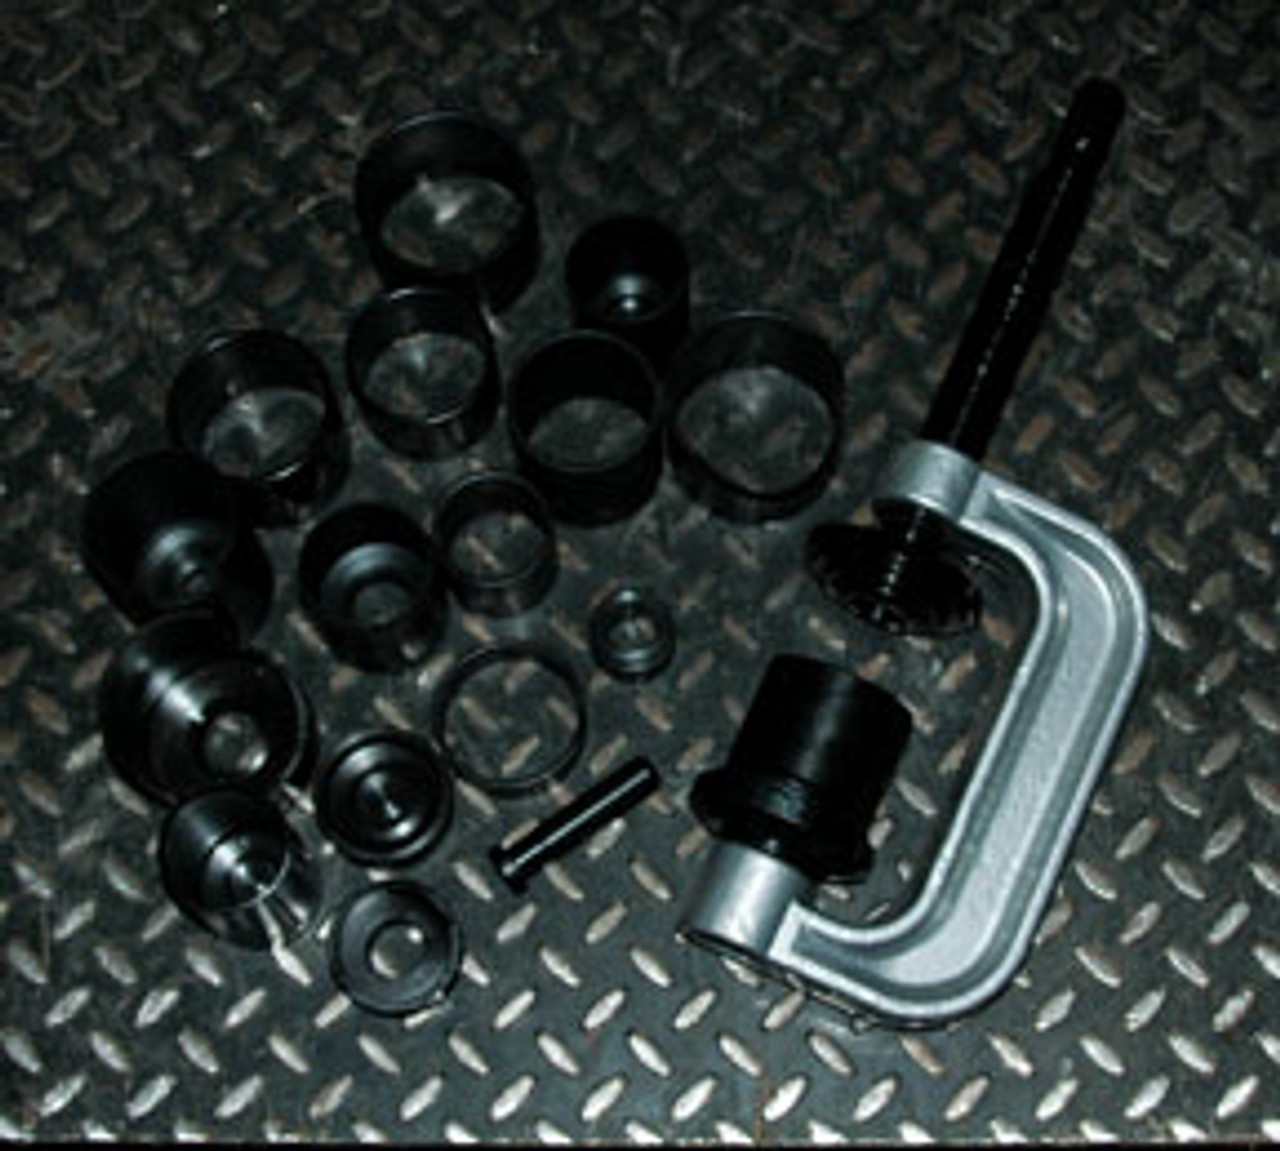 21 Pc. Master Ball Joint Service Set